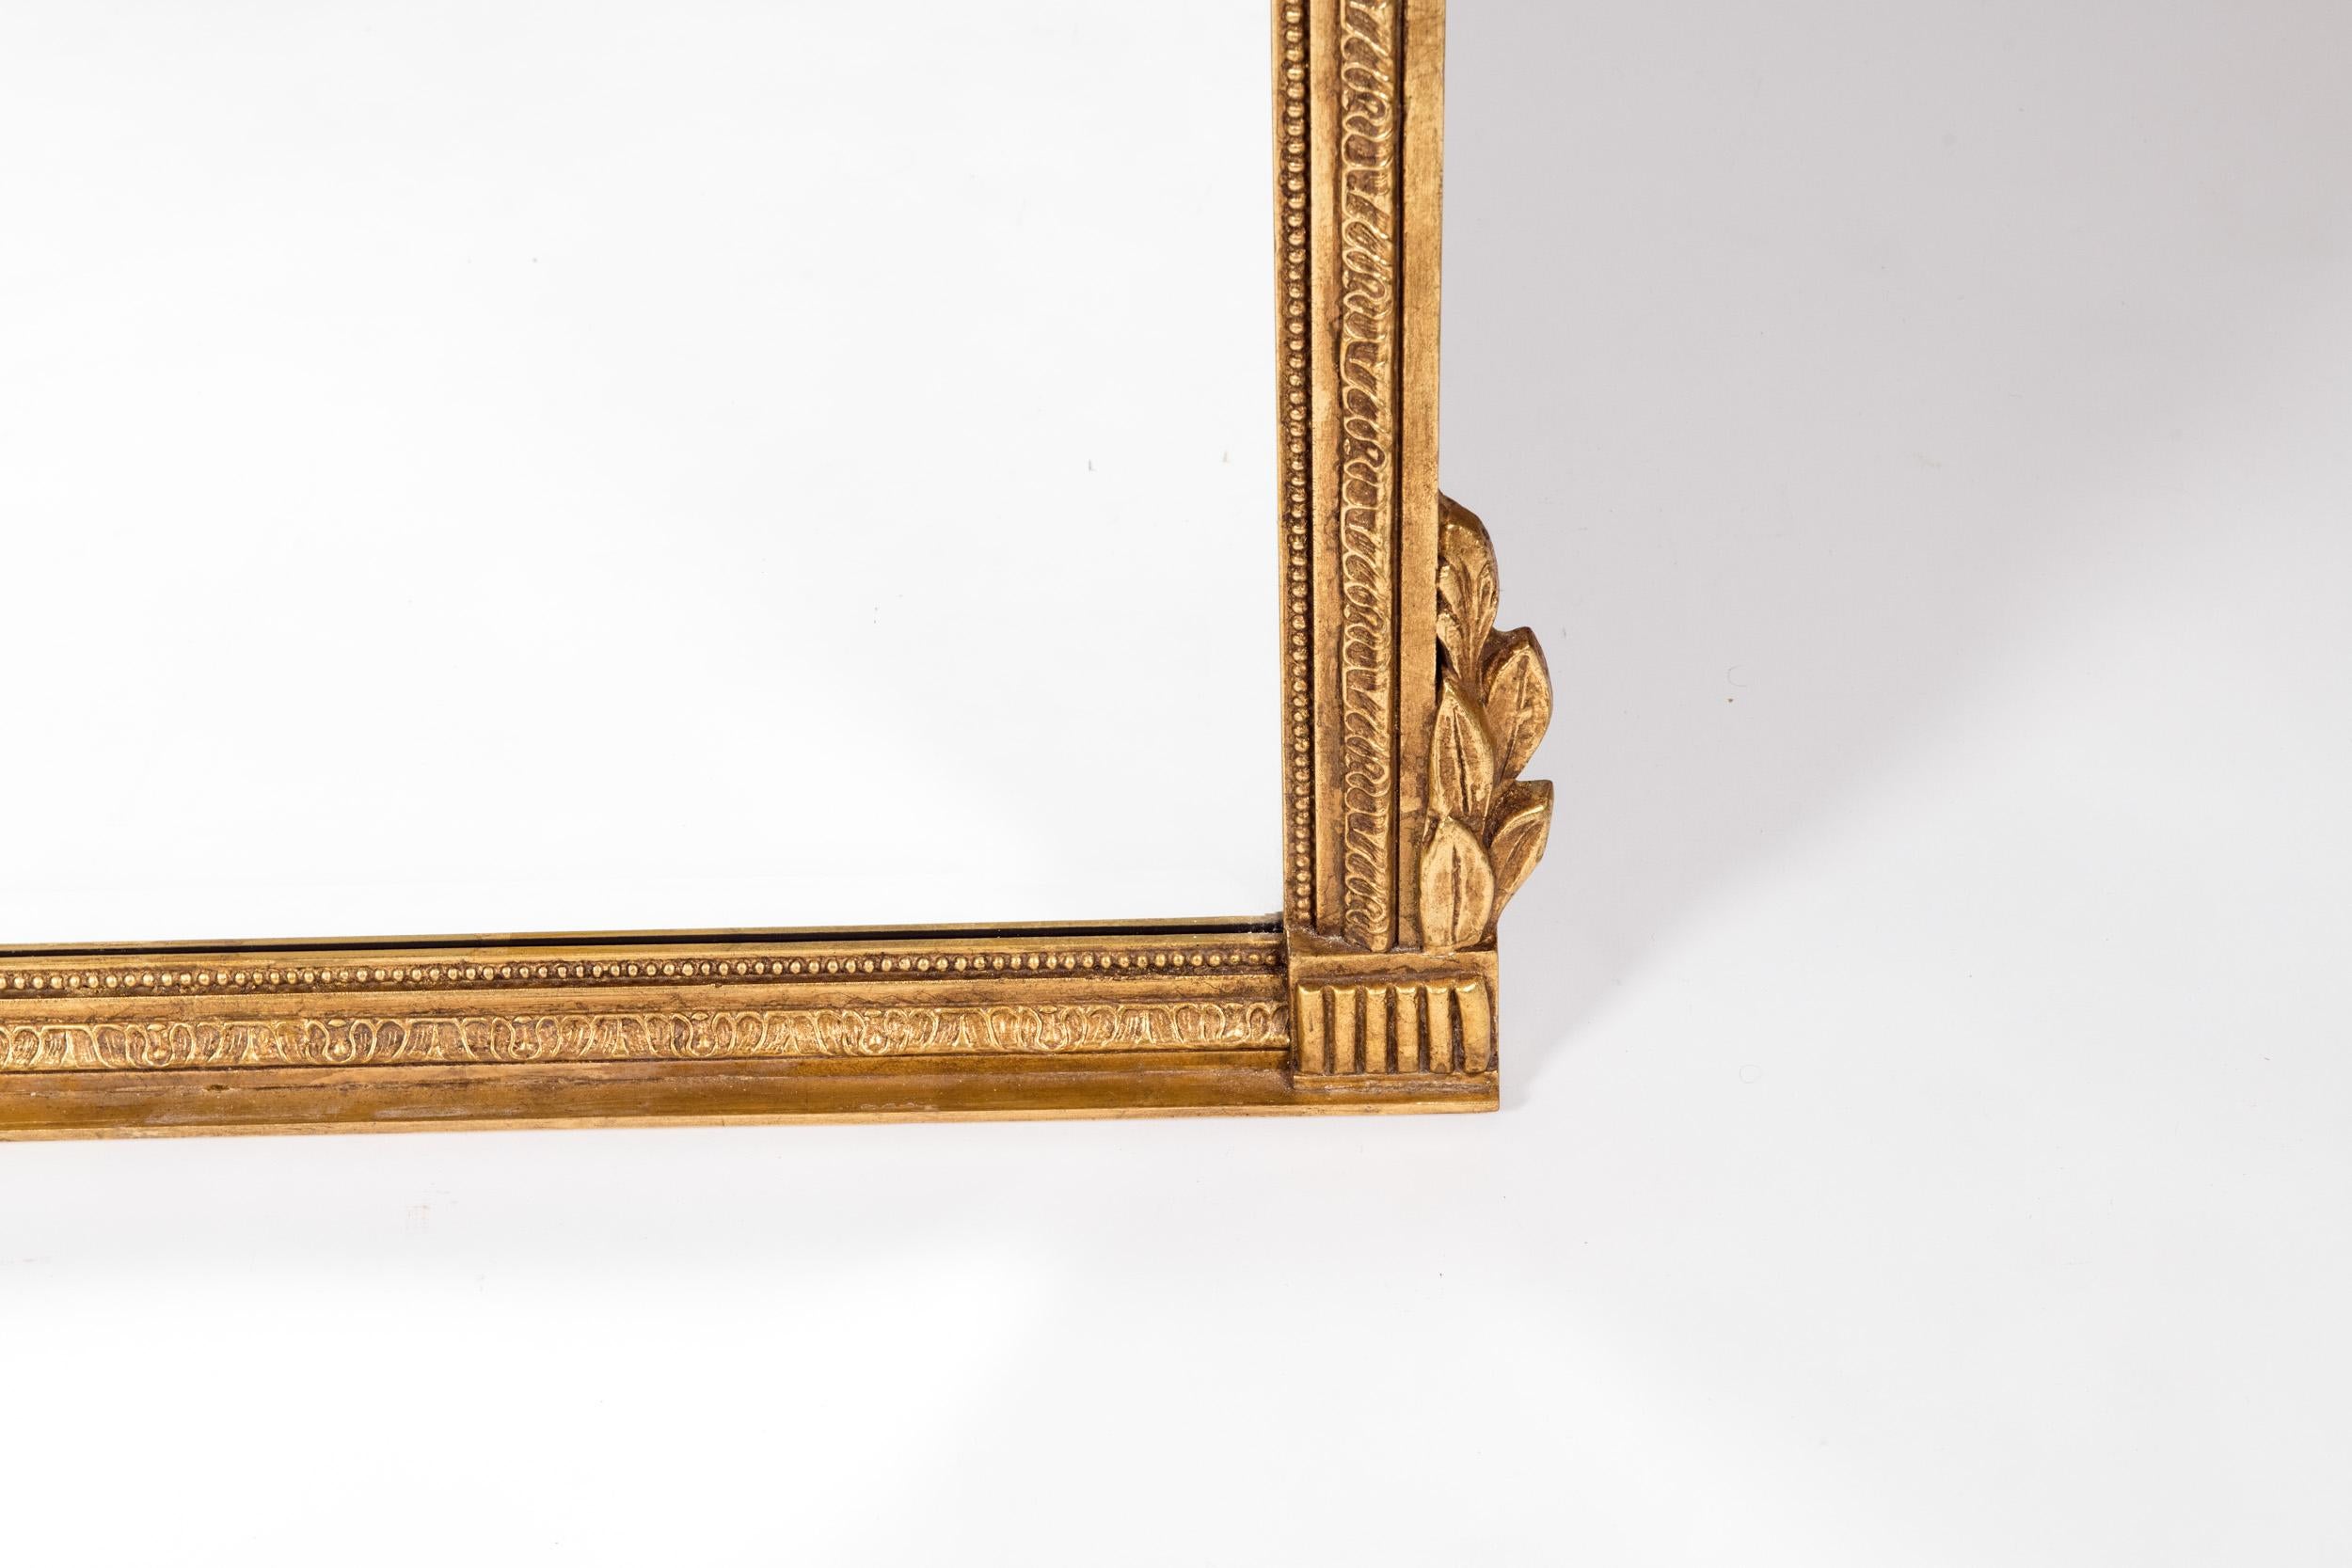 French Louis XVI style gilt wood beveled hanging wall mirror. The beveled hanging mirror is in excellent vintage condition. Minor wear consistent with use / age. The mirror measure about 46 inches high x 40 inches wide.